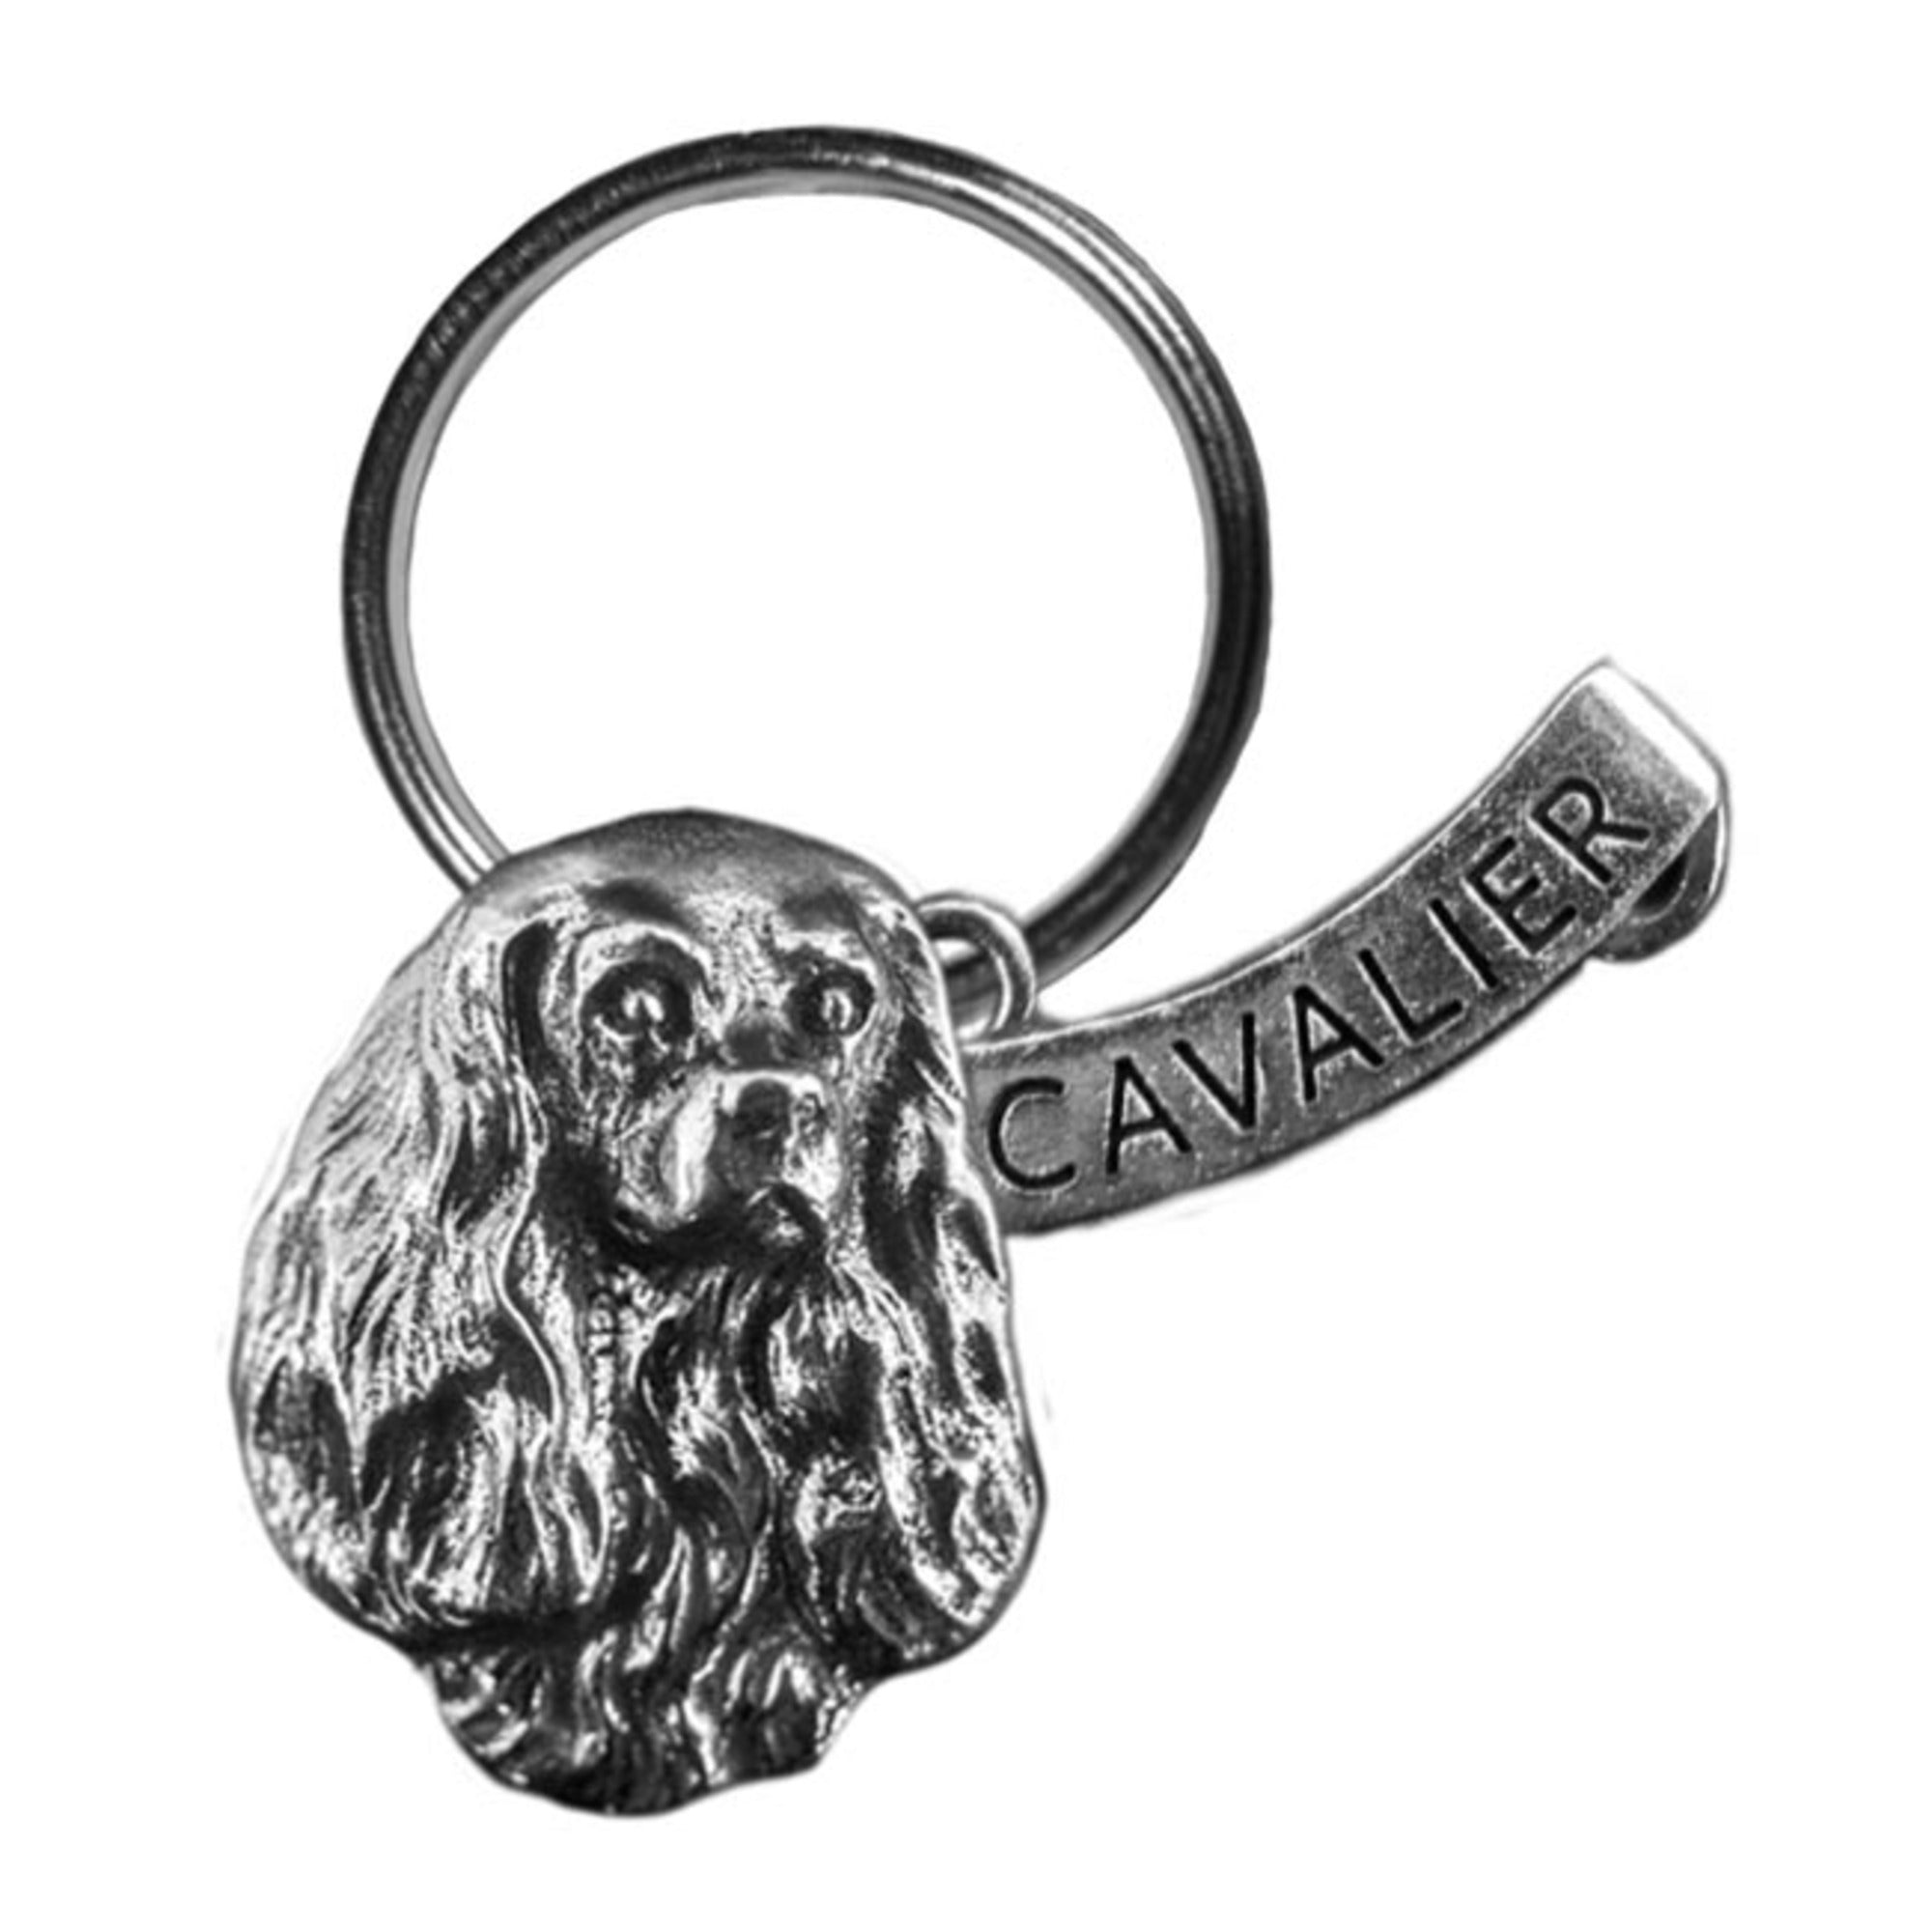 New-Spin Metal Casting Cavalier Keychain